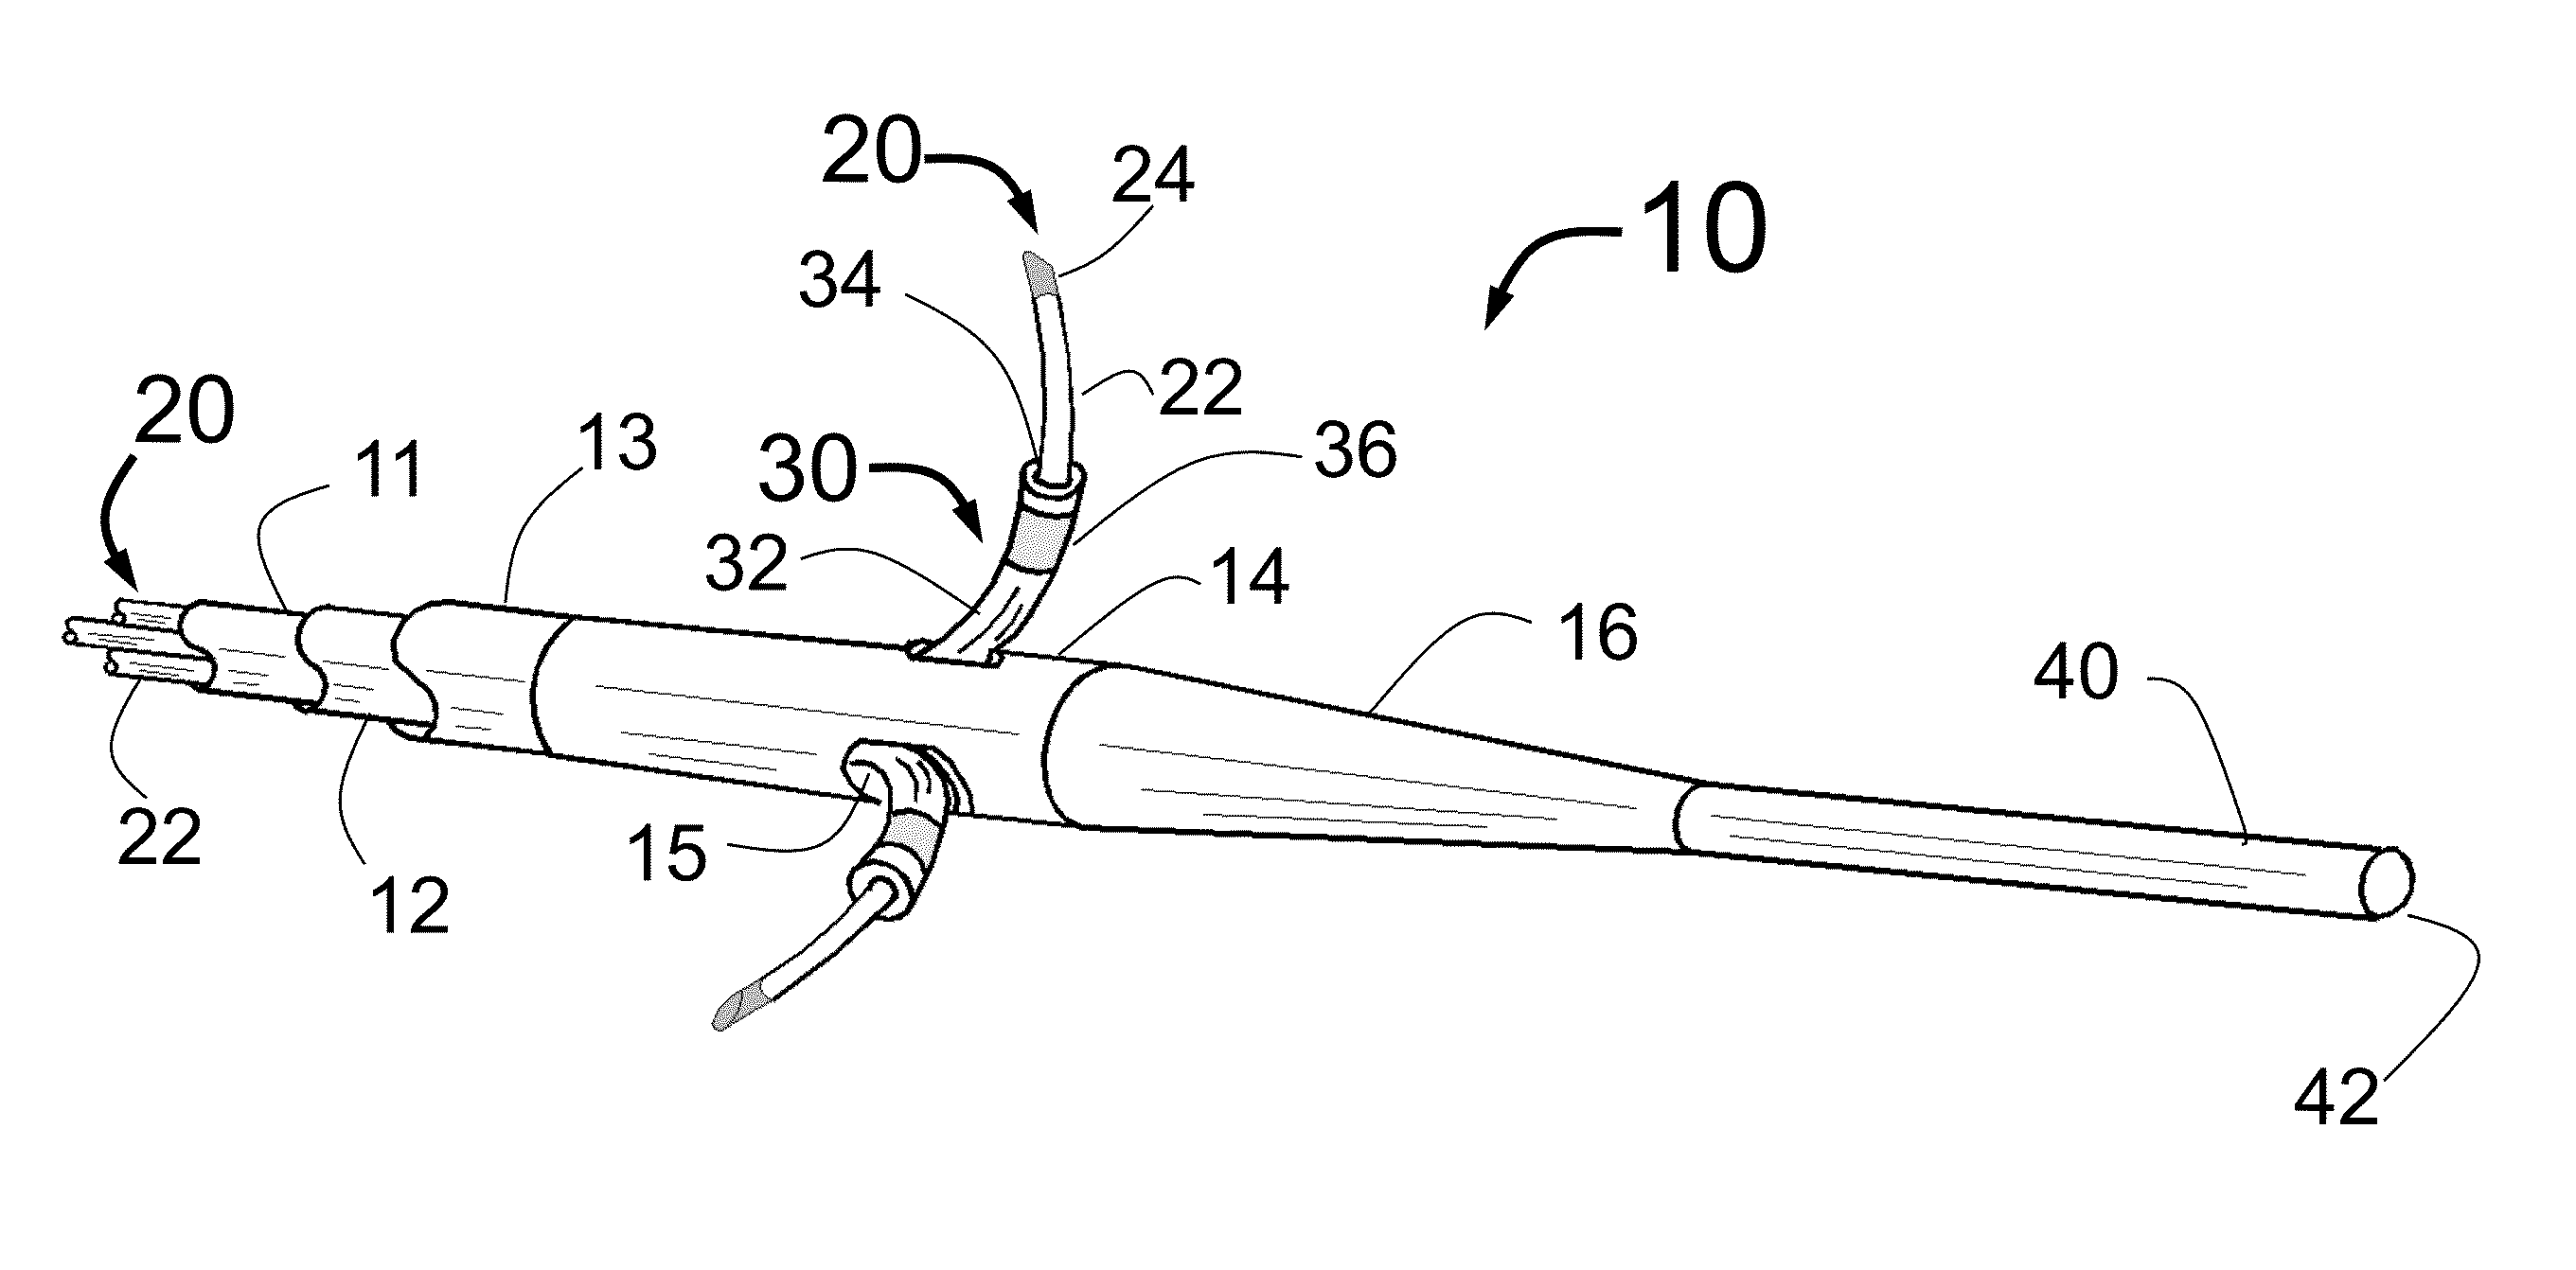 Apparatus for effective ablation and nerve sensing associated with denervation